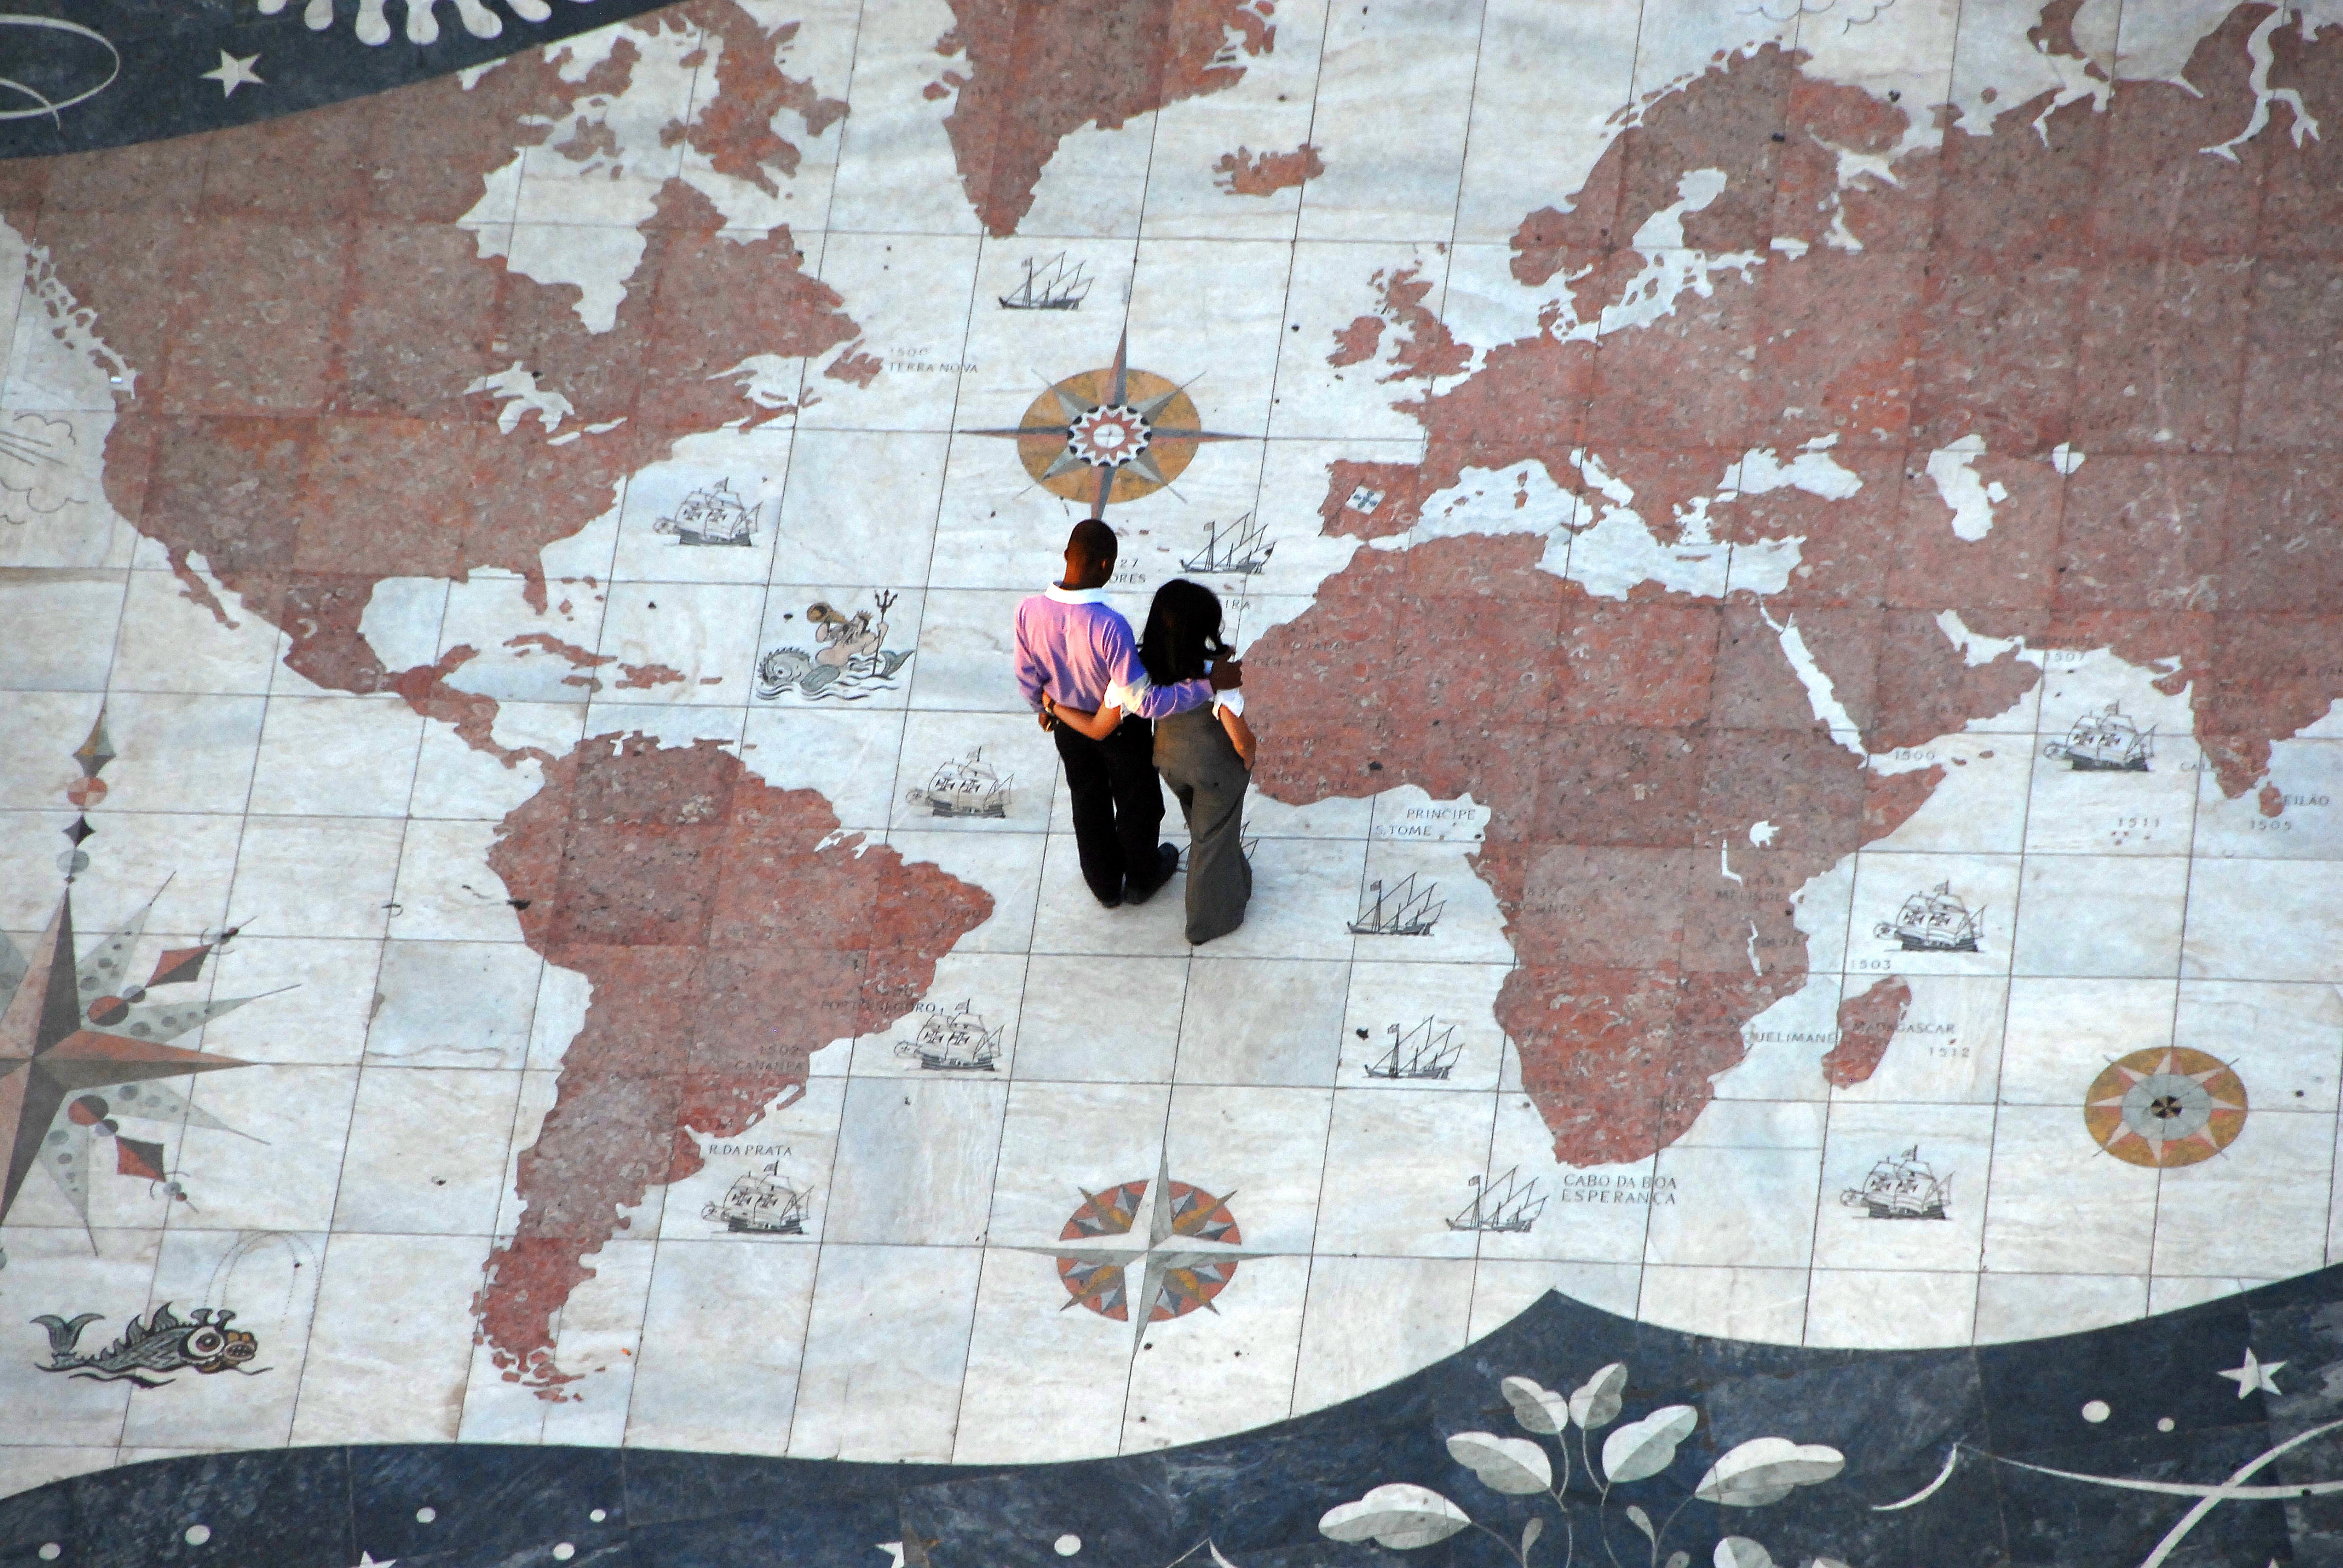 A couple standing on a floor painted as a map. | Source: Pixabay